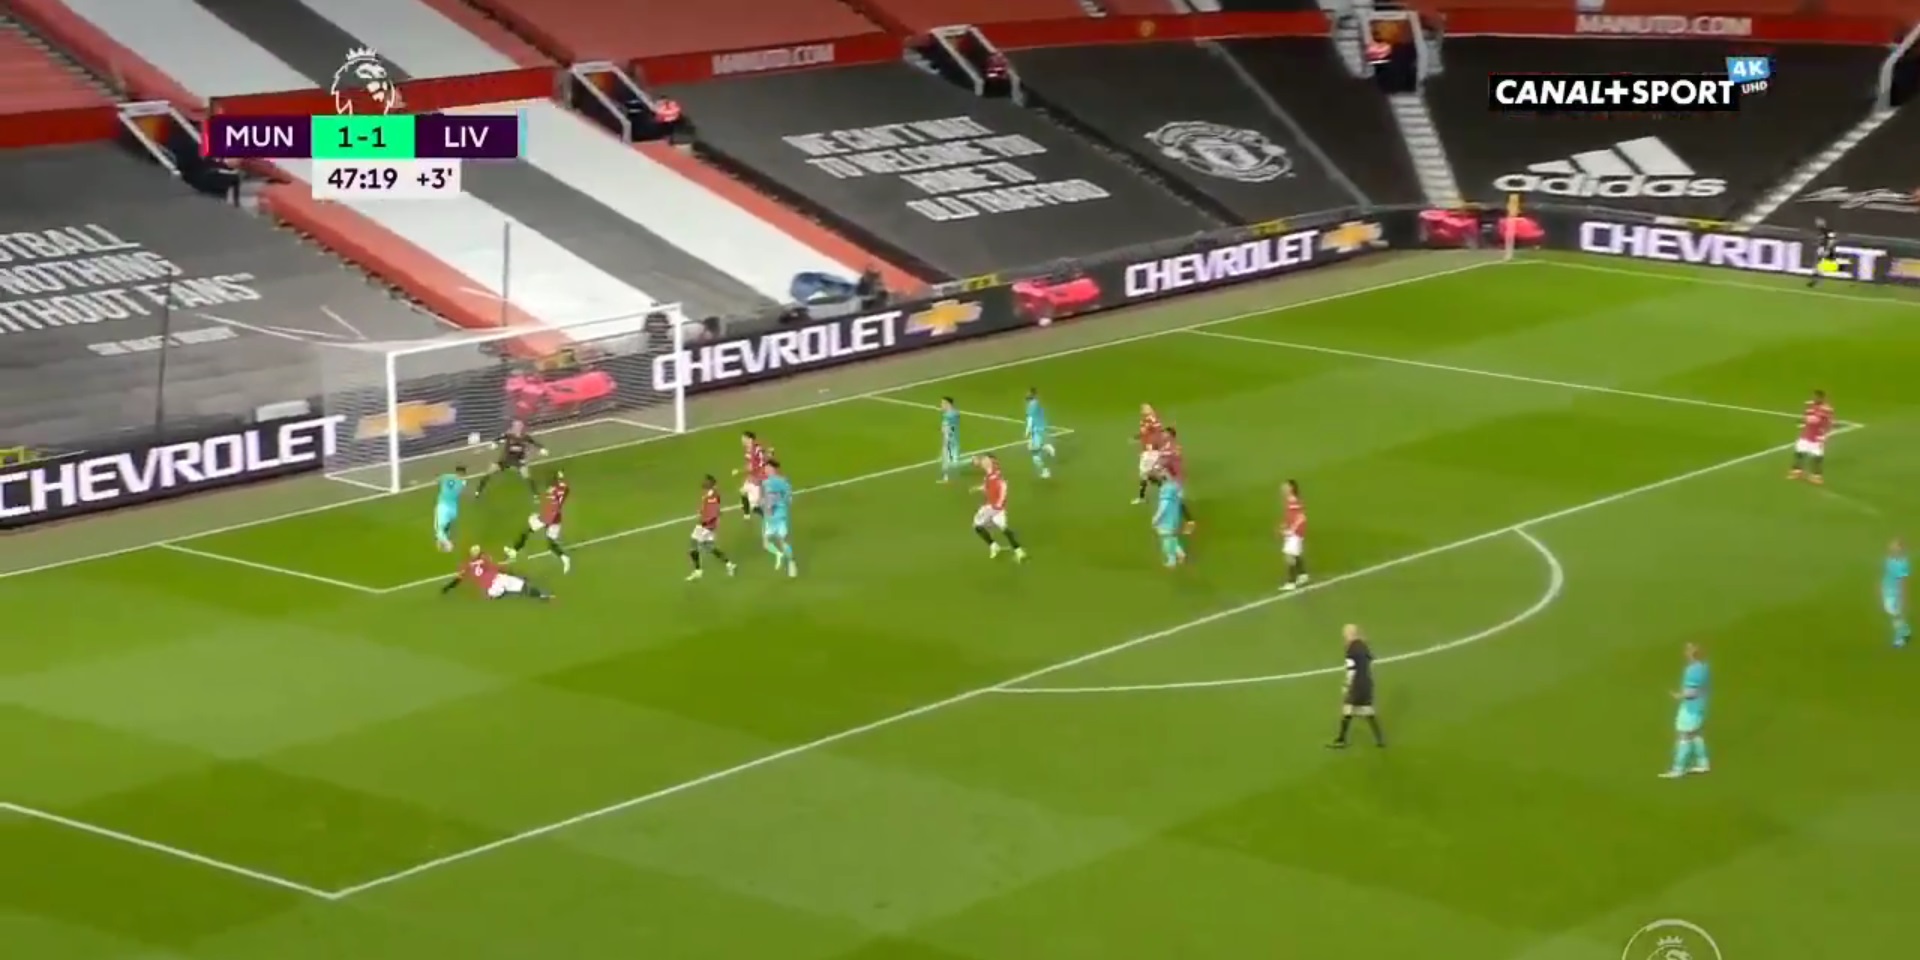 (Video) Liverpool take 2-1 lead at Old Trafford through Bobby Firmino bullet